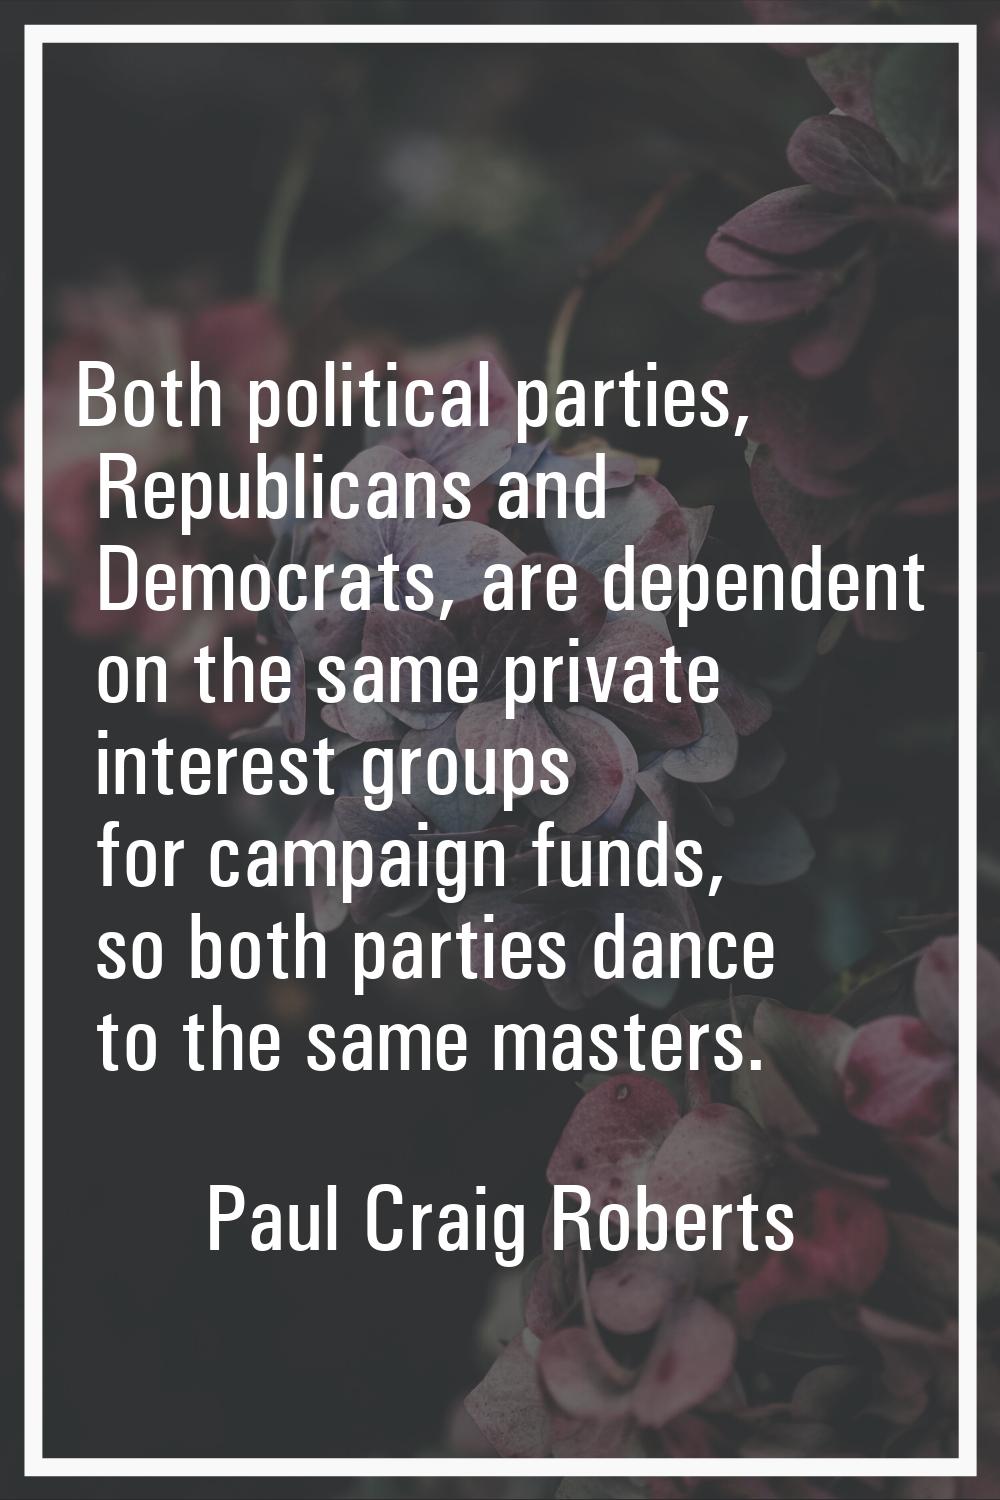 Both political parties, Republicans and Democrats, are dependent on the same private interest group